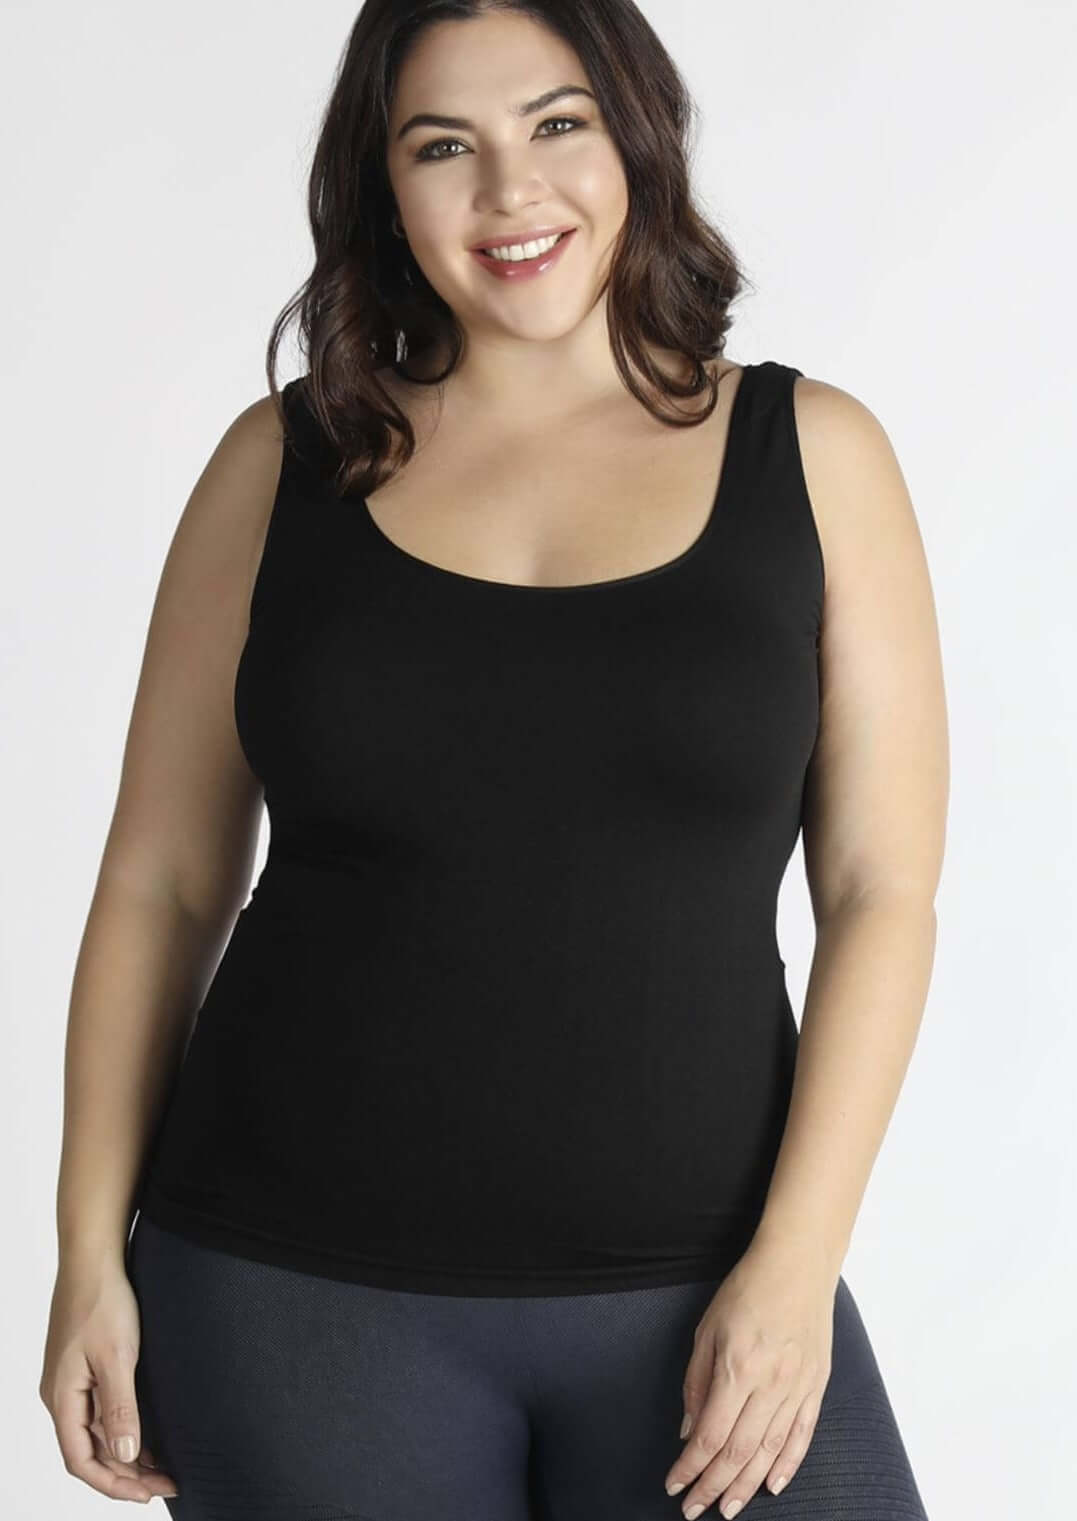 Niki Biki Ladies Plus Size Fitted Reversible Essentials Tank Top Style# NS7180 in Black | Made in USA | Classy Cozy Cool Women's Made in America Boutique